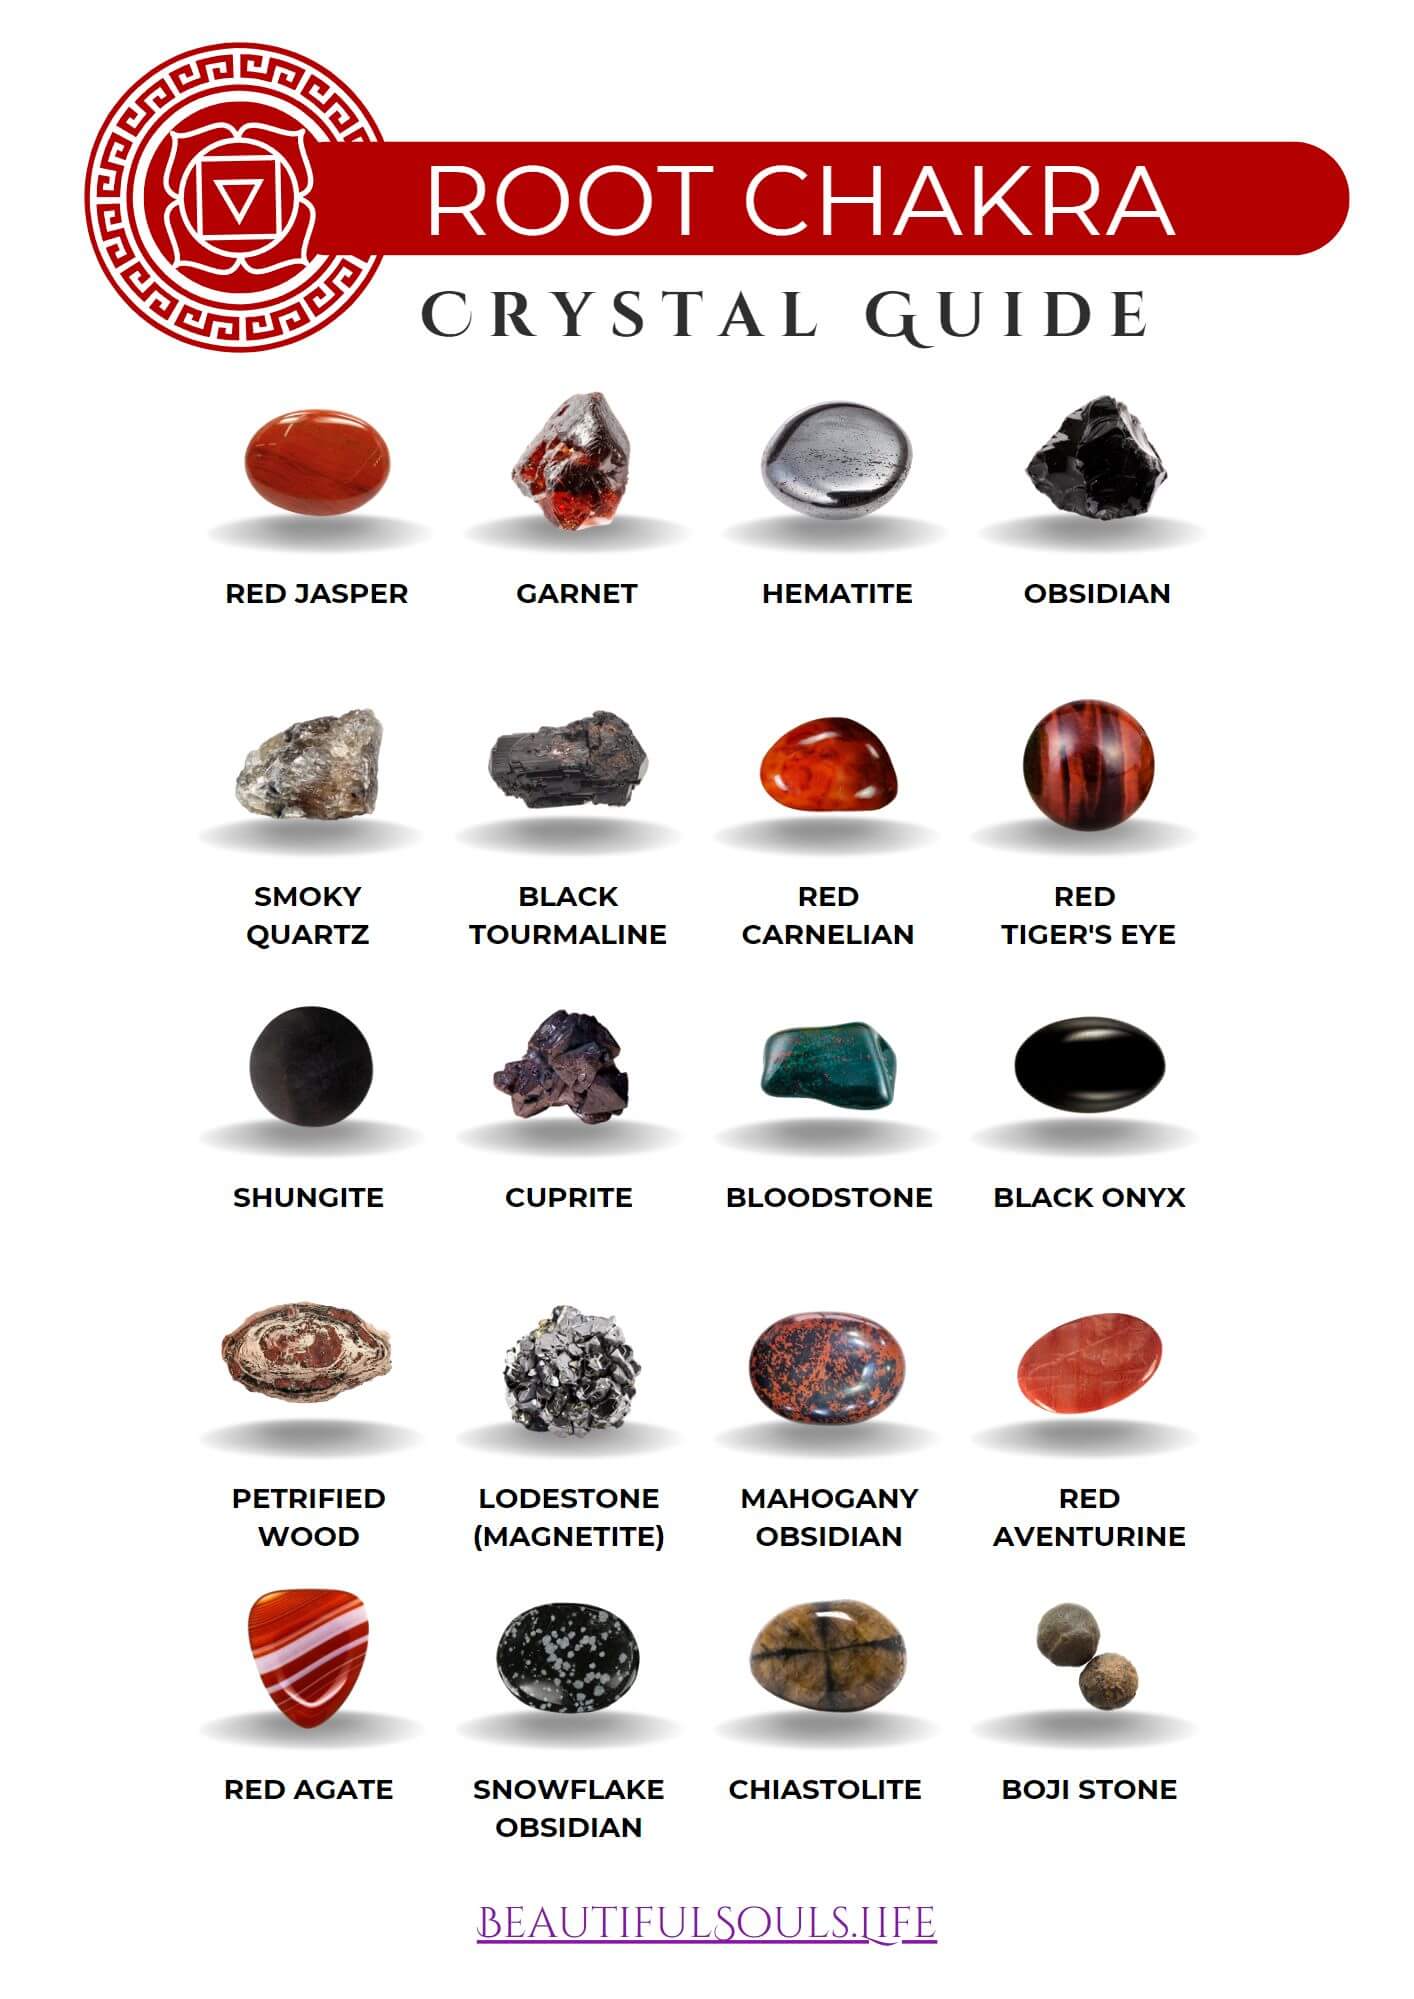 Extensive Chart of Root Chakra Minerals and Crystals